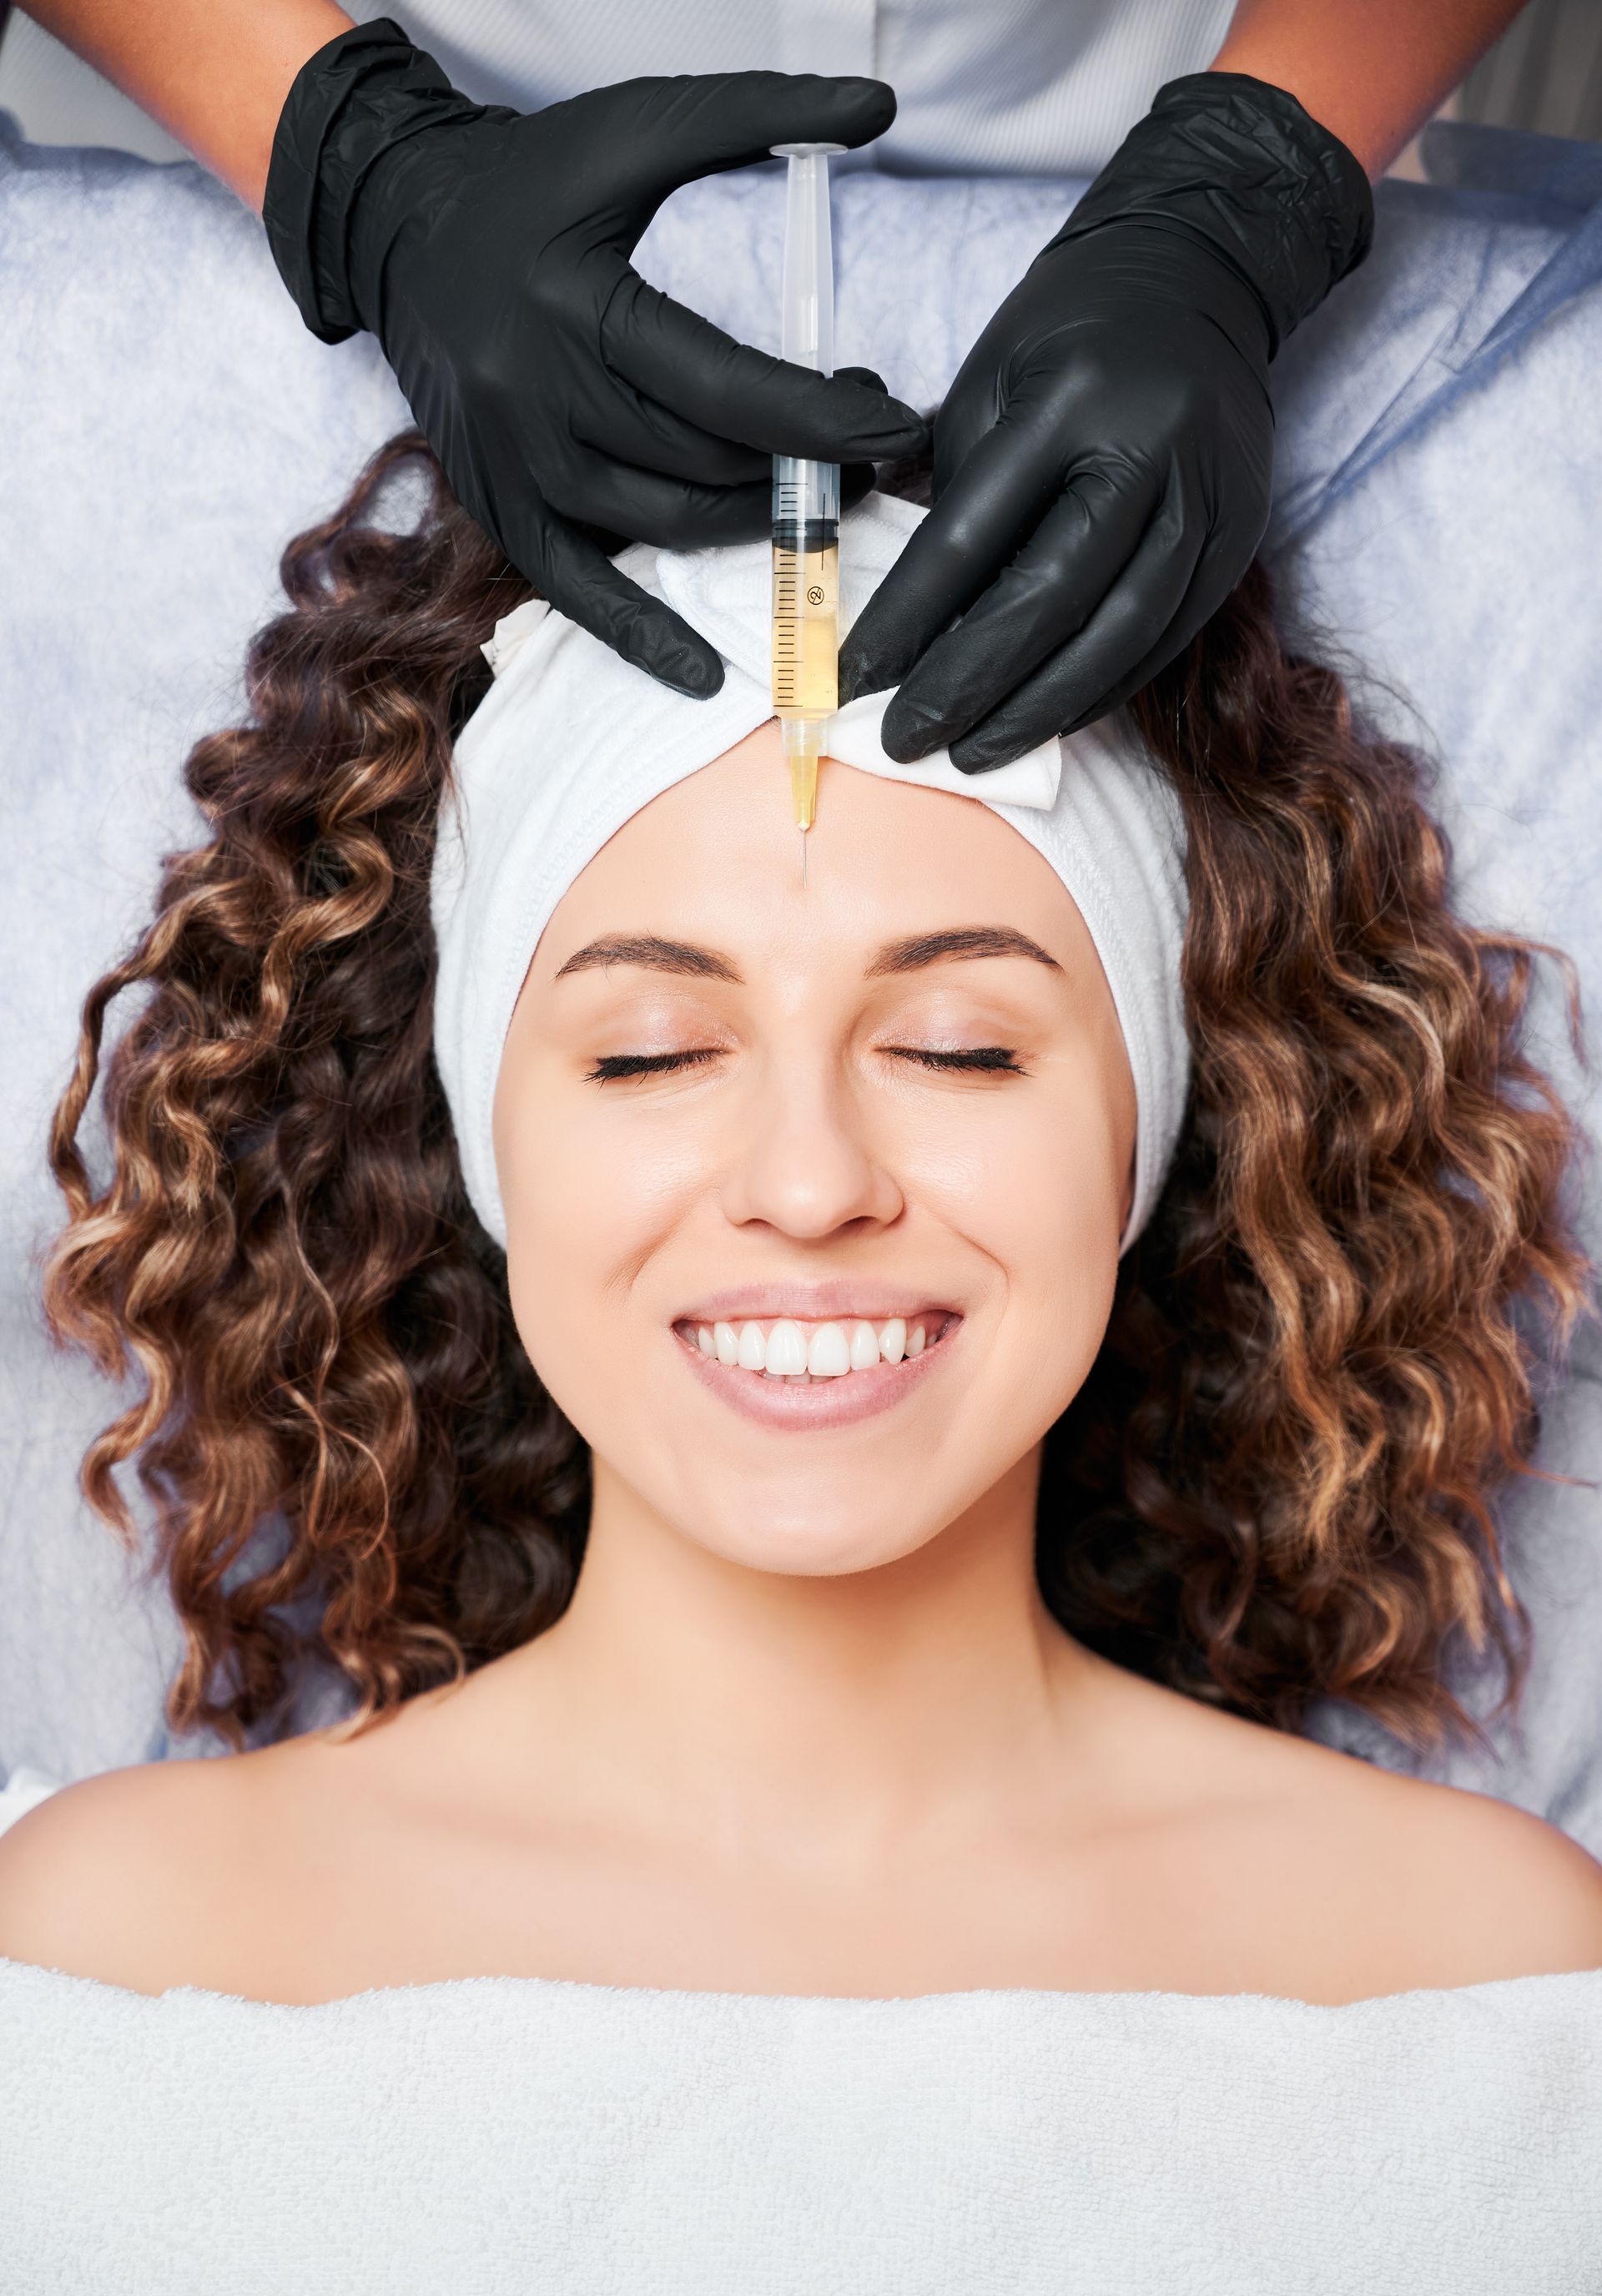 a woman is smiling while getting an injection in her forehead